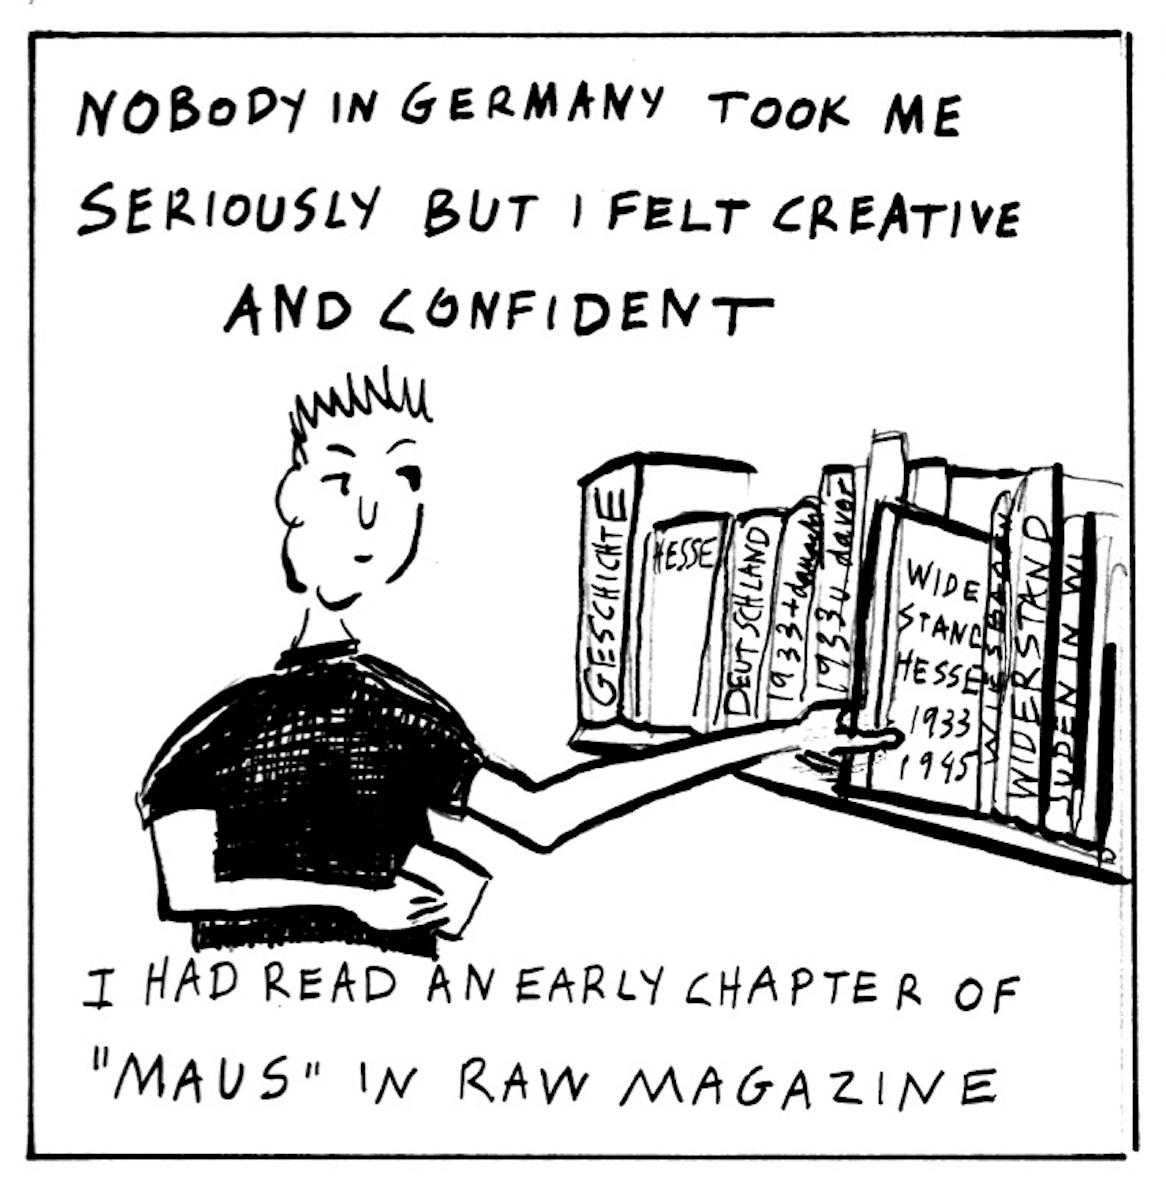 â€œNobody in Germany took me seriously but I felt creative and confident. I had read an early chapter of â€˜Mapsâ€™ in RAW Magazine.â€